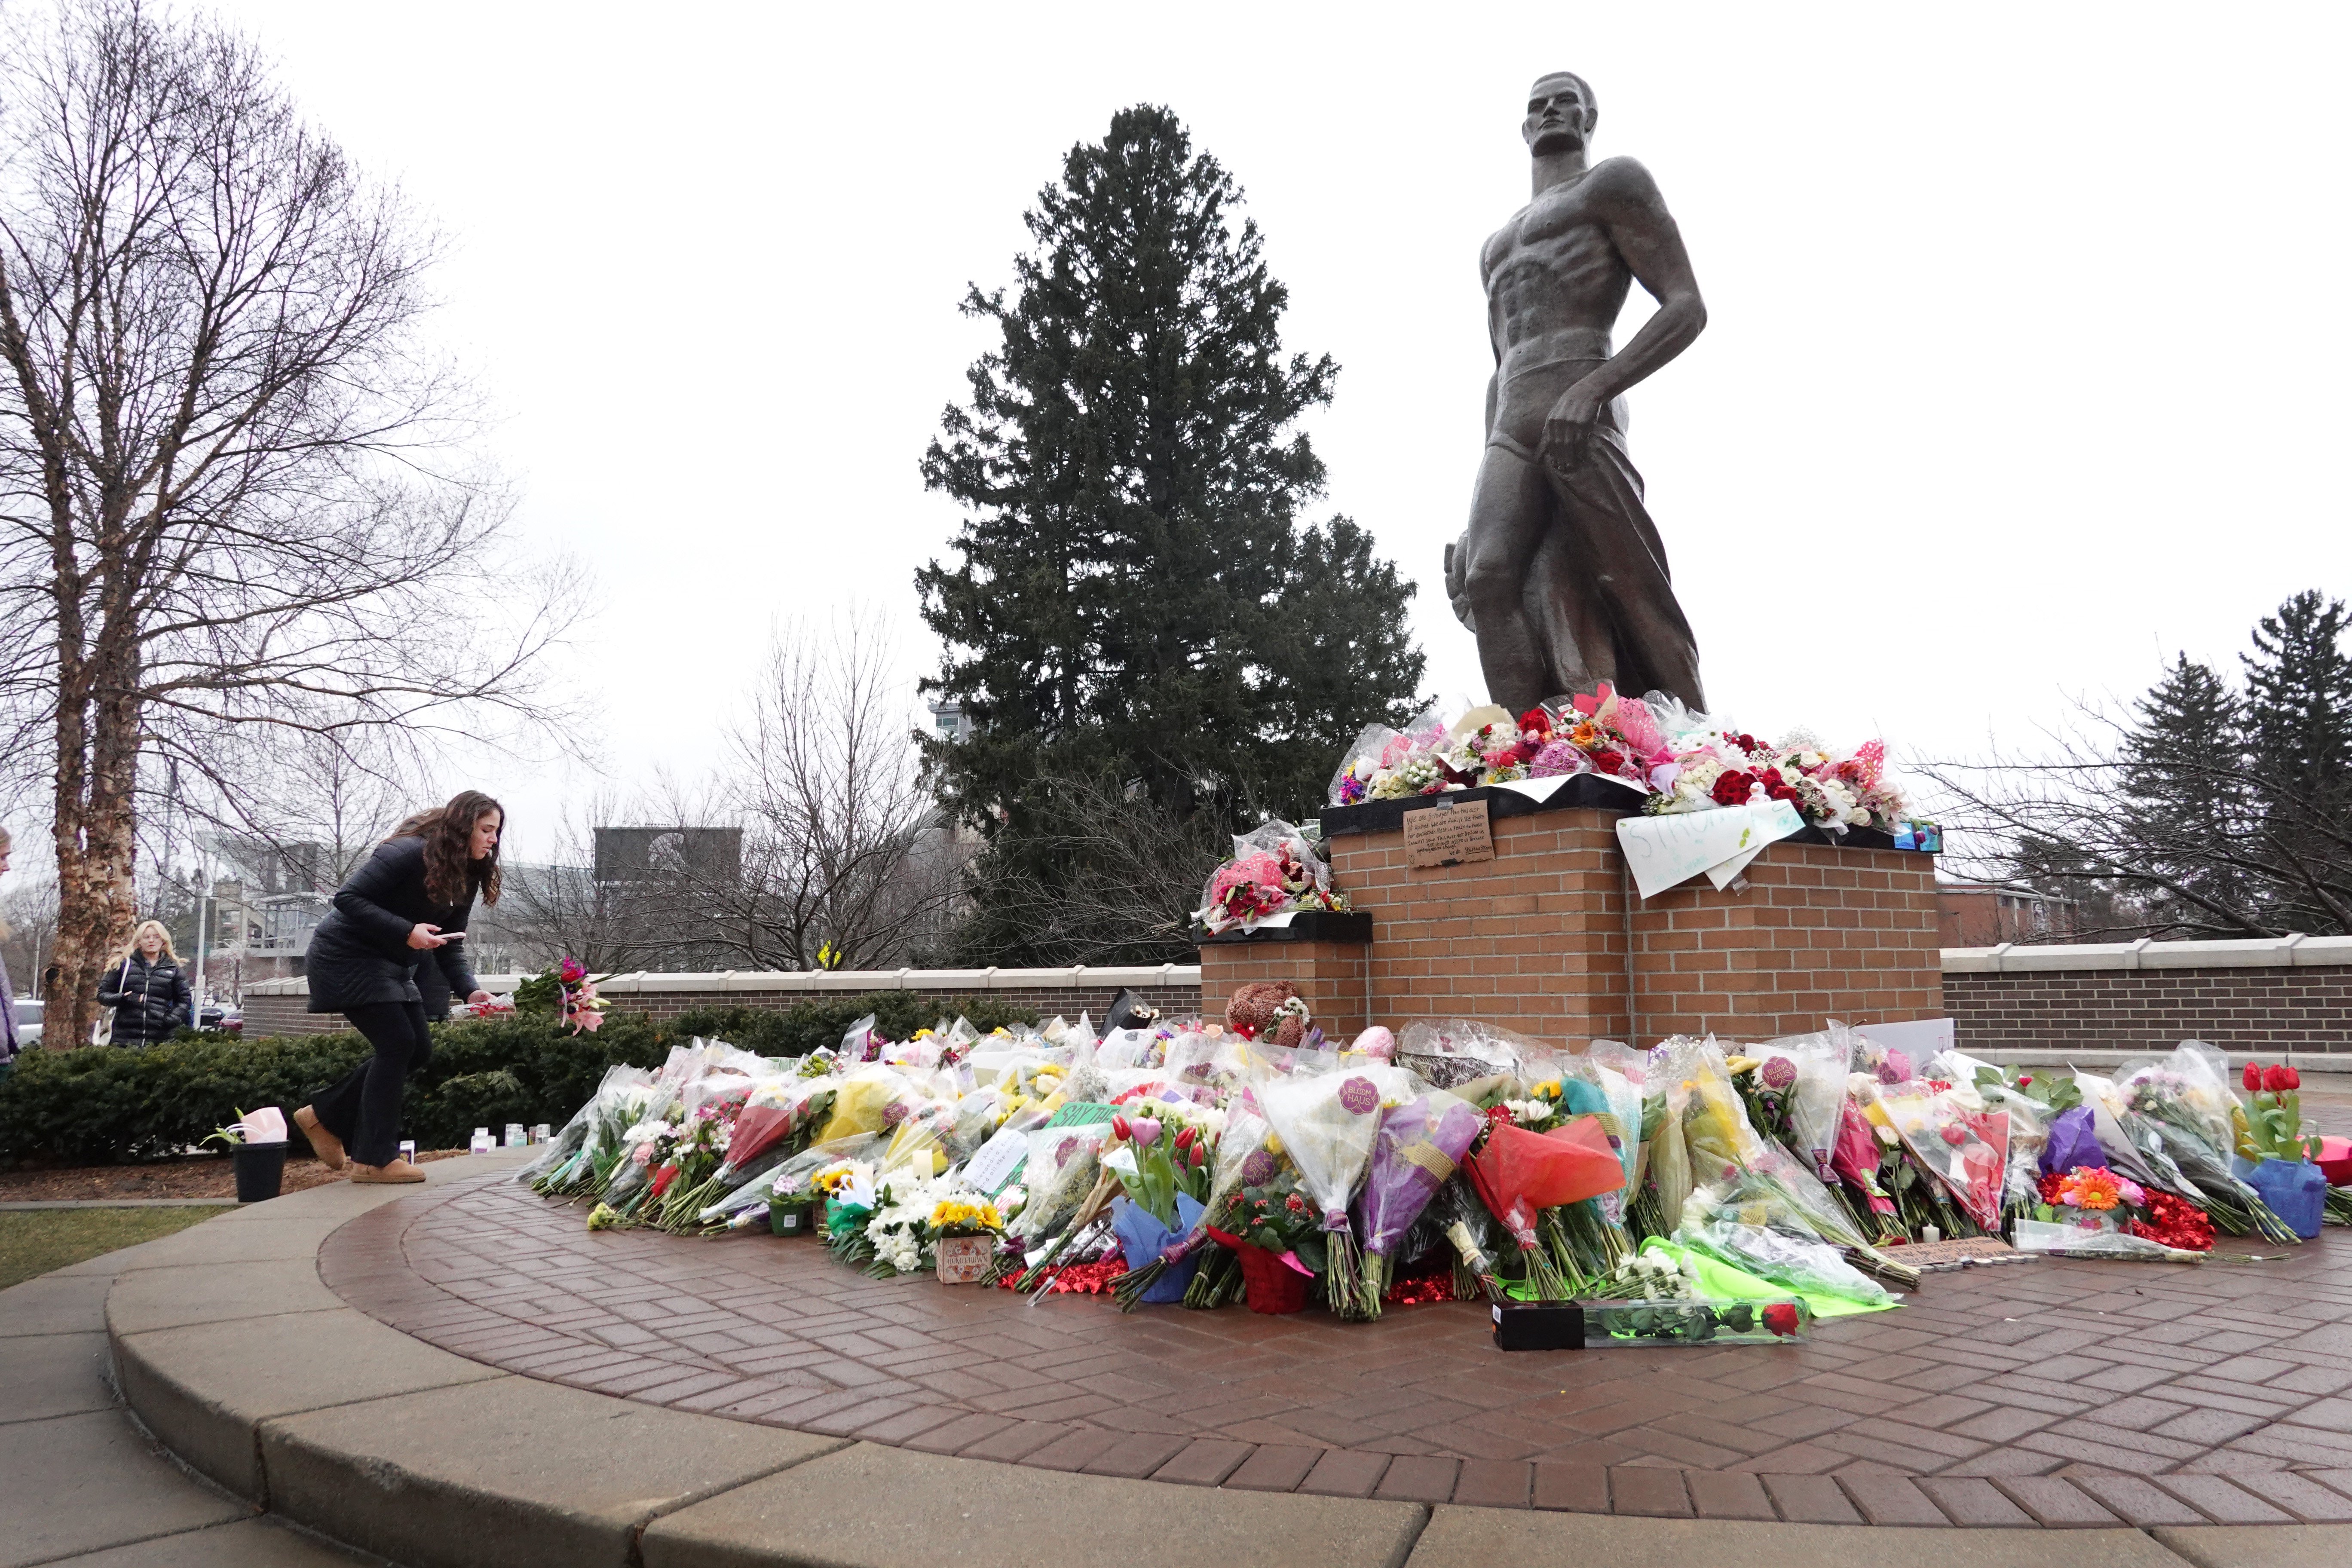 a woman lays a bouquet of flowers with a large assemblage of other bouquets at the feet of a muscular male statue on a brick podium